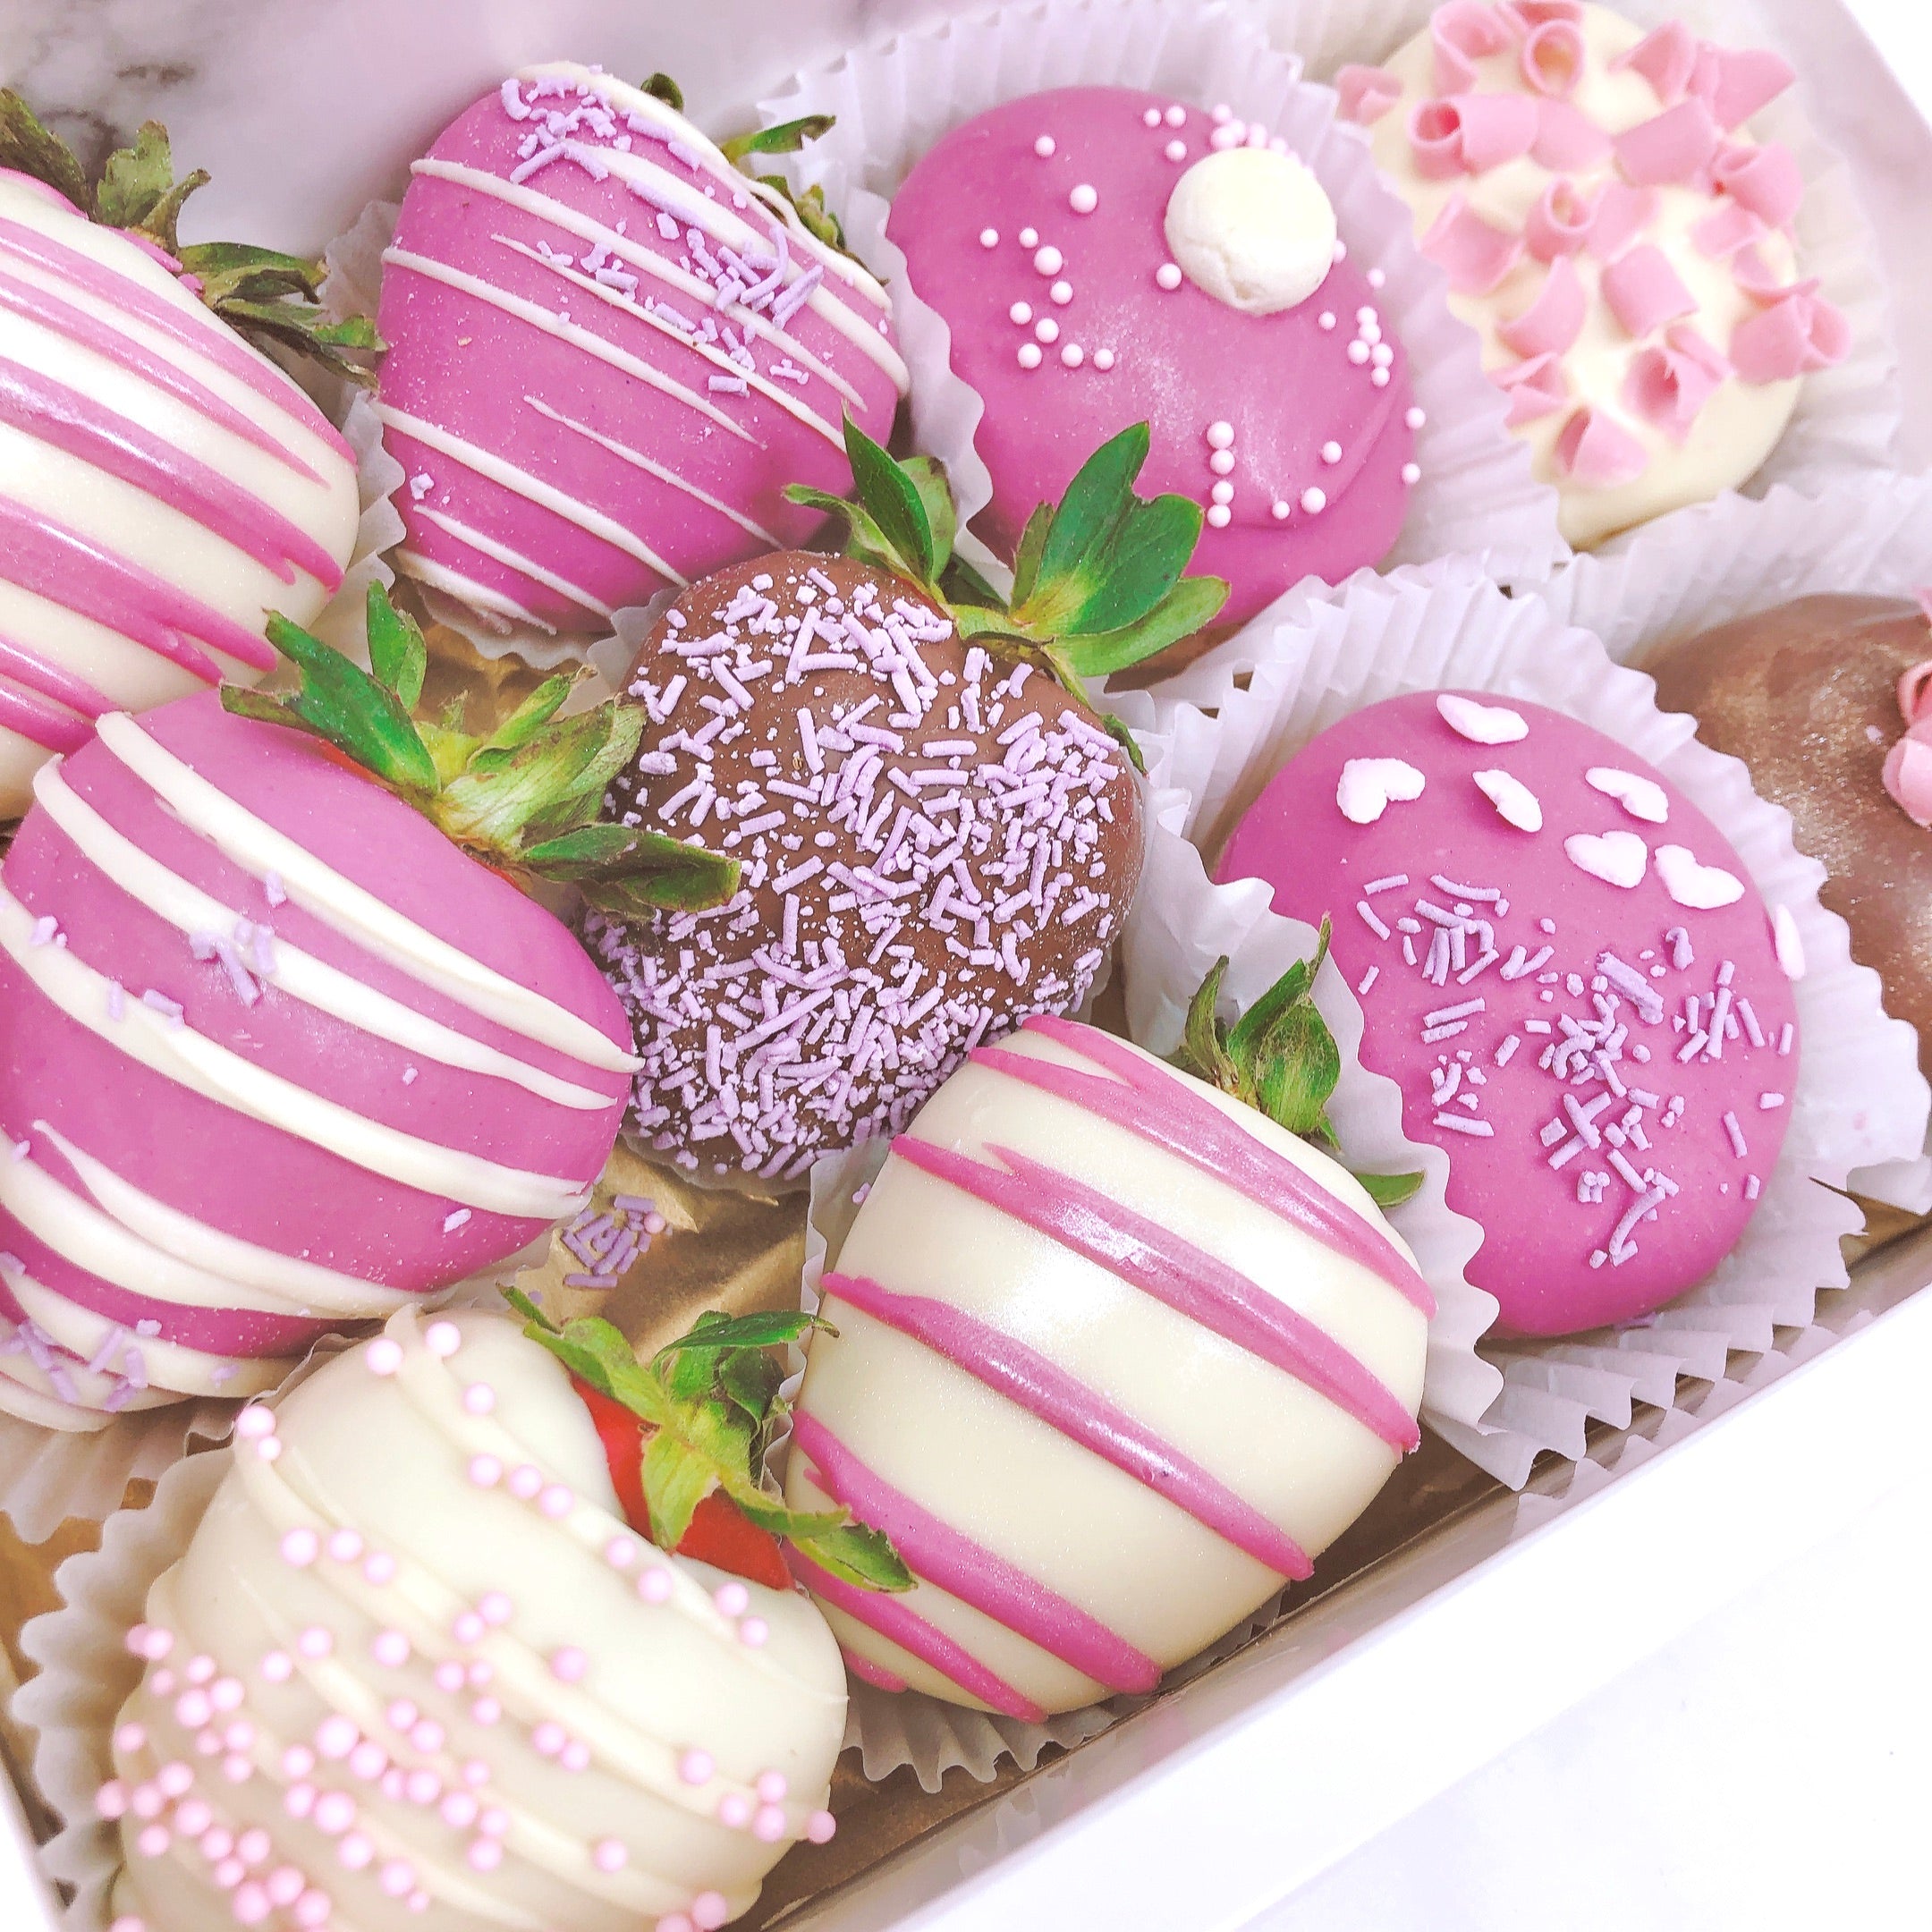 Mini doughnuts and strawberry covered in chocolate in desseret gift box for same day delivery online order